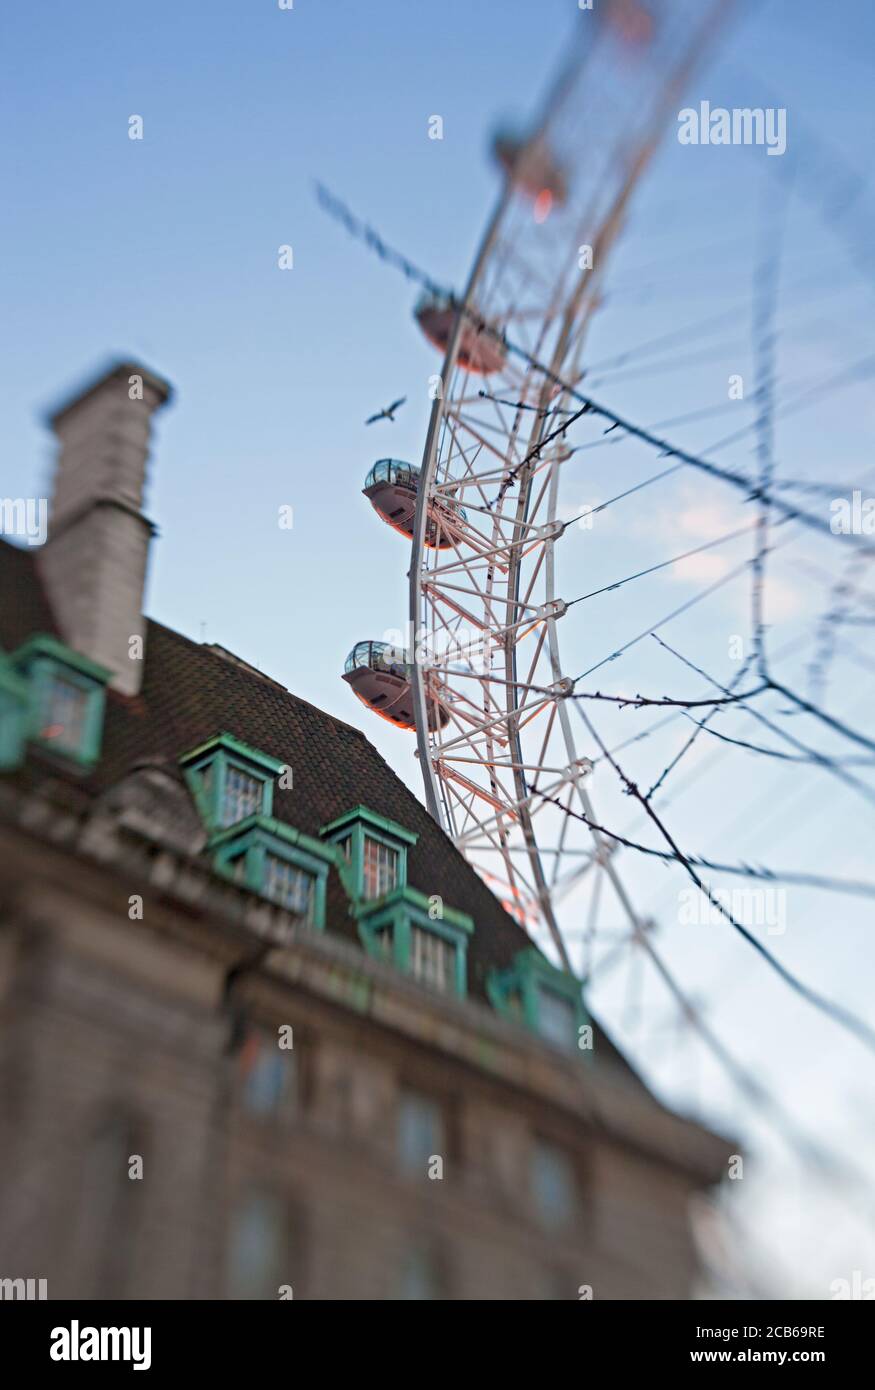 The giant London Eye Ferris wheel looms over a building Stock Photo